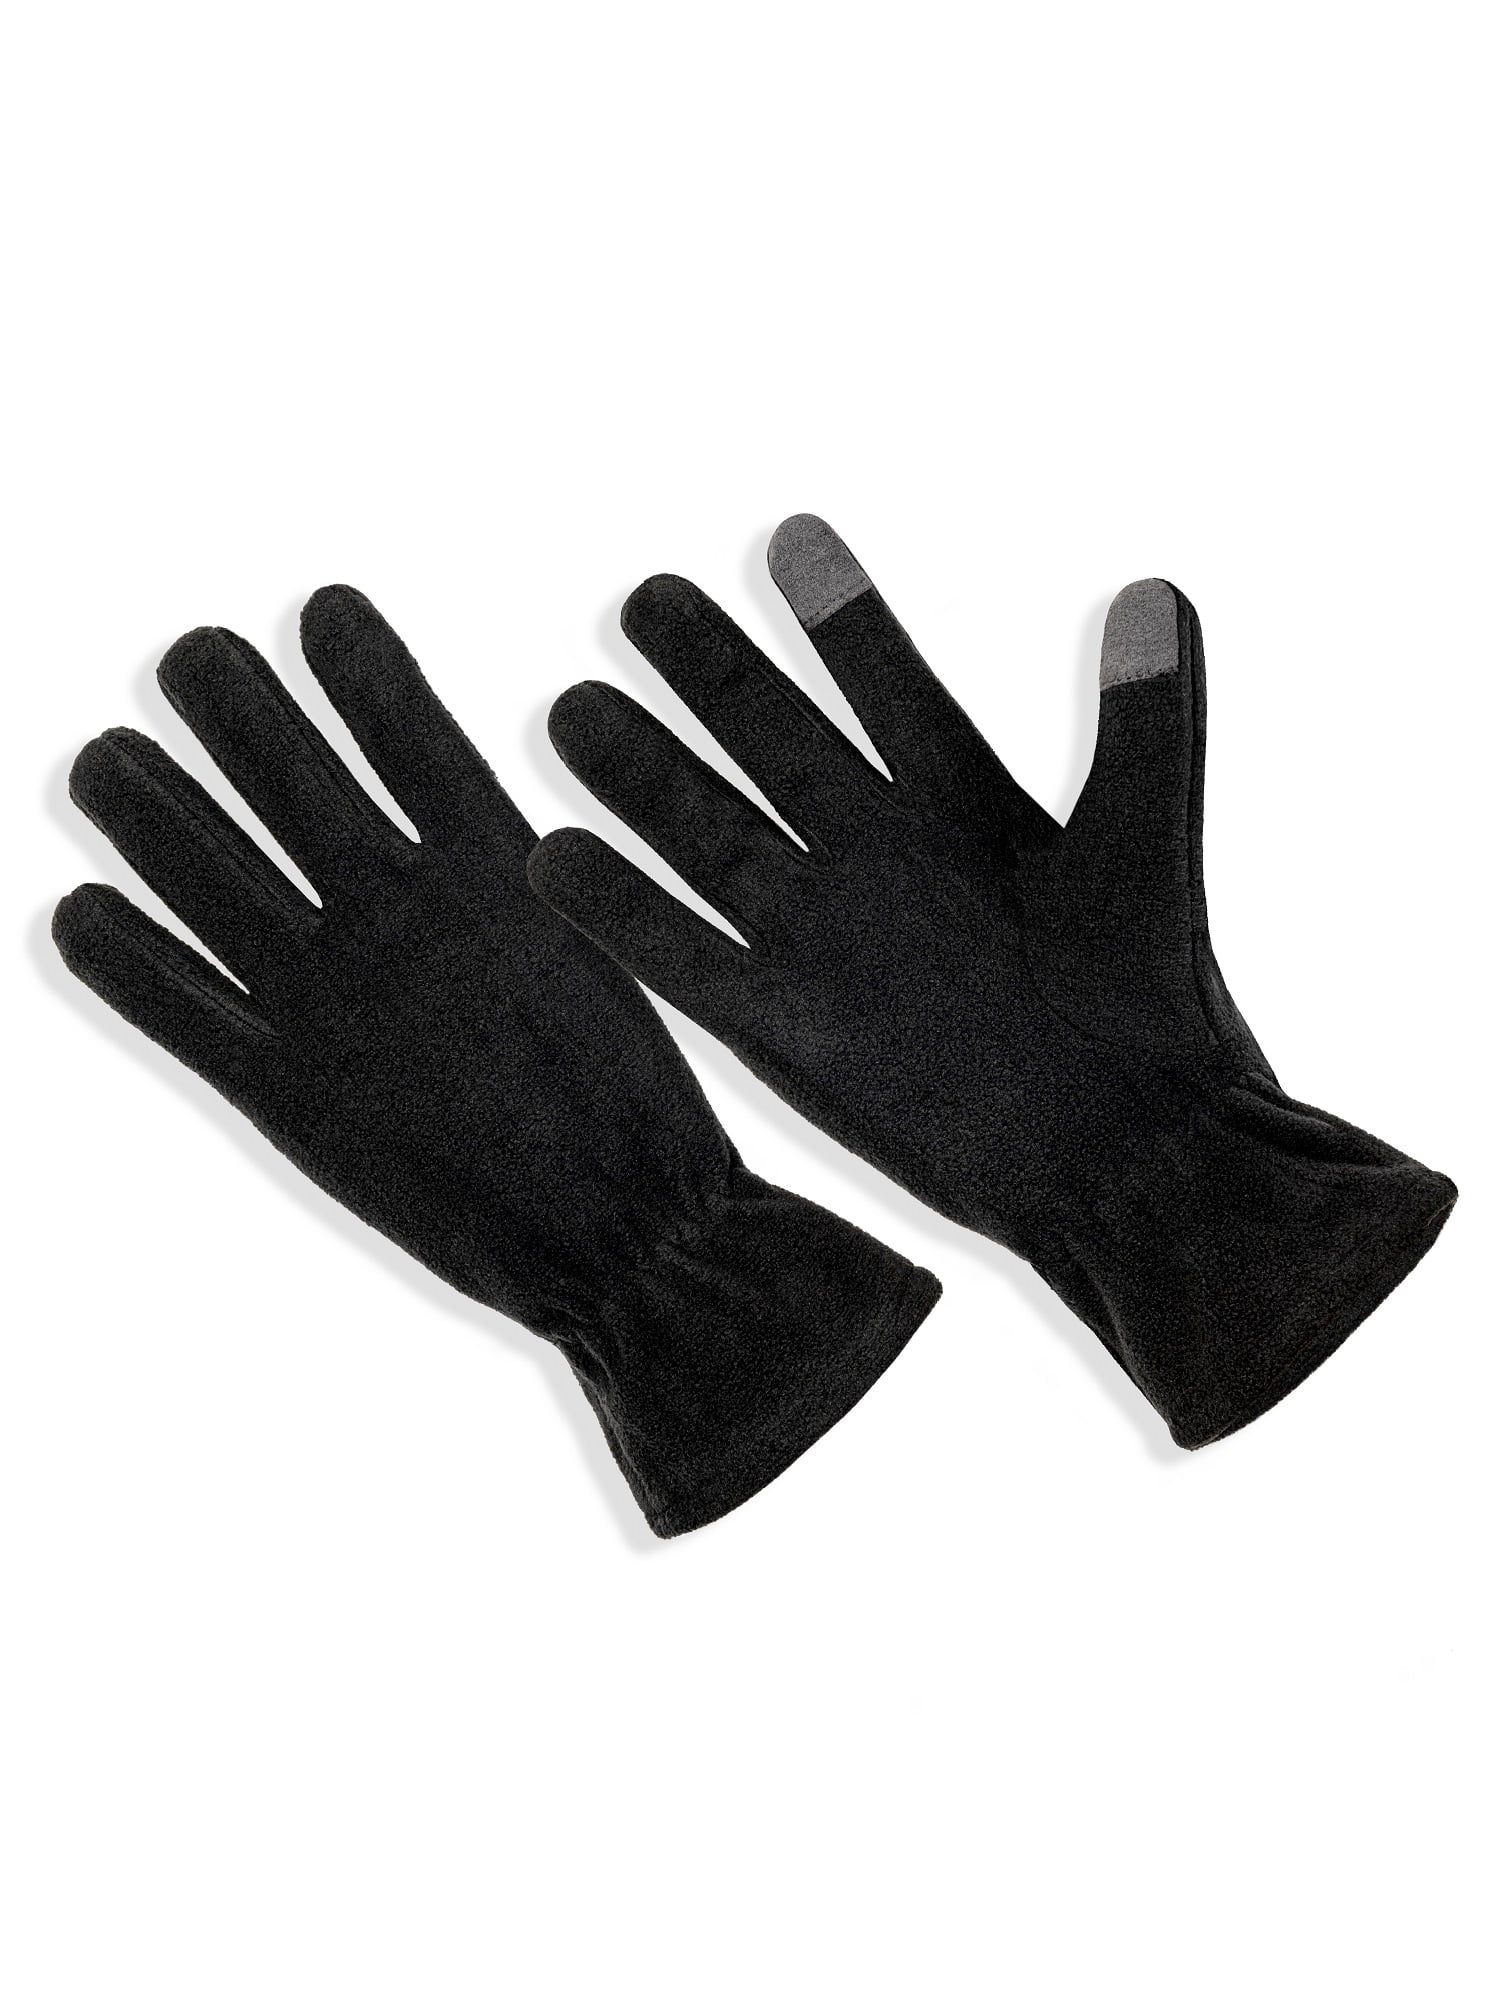 Hand Master T9IL All Purpose Jersey Knit Gloves Size L/ 12 Pairs 0449704000688 